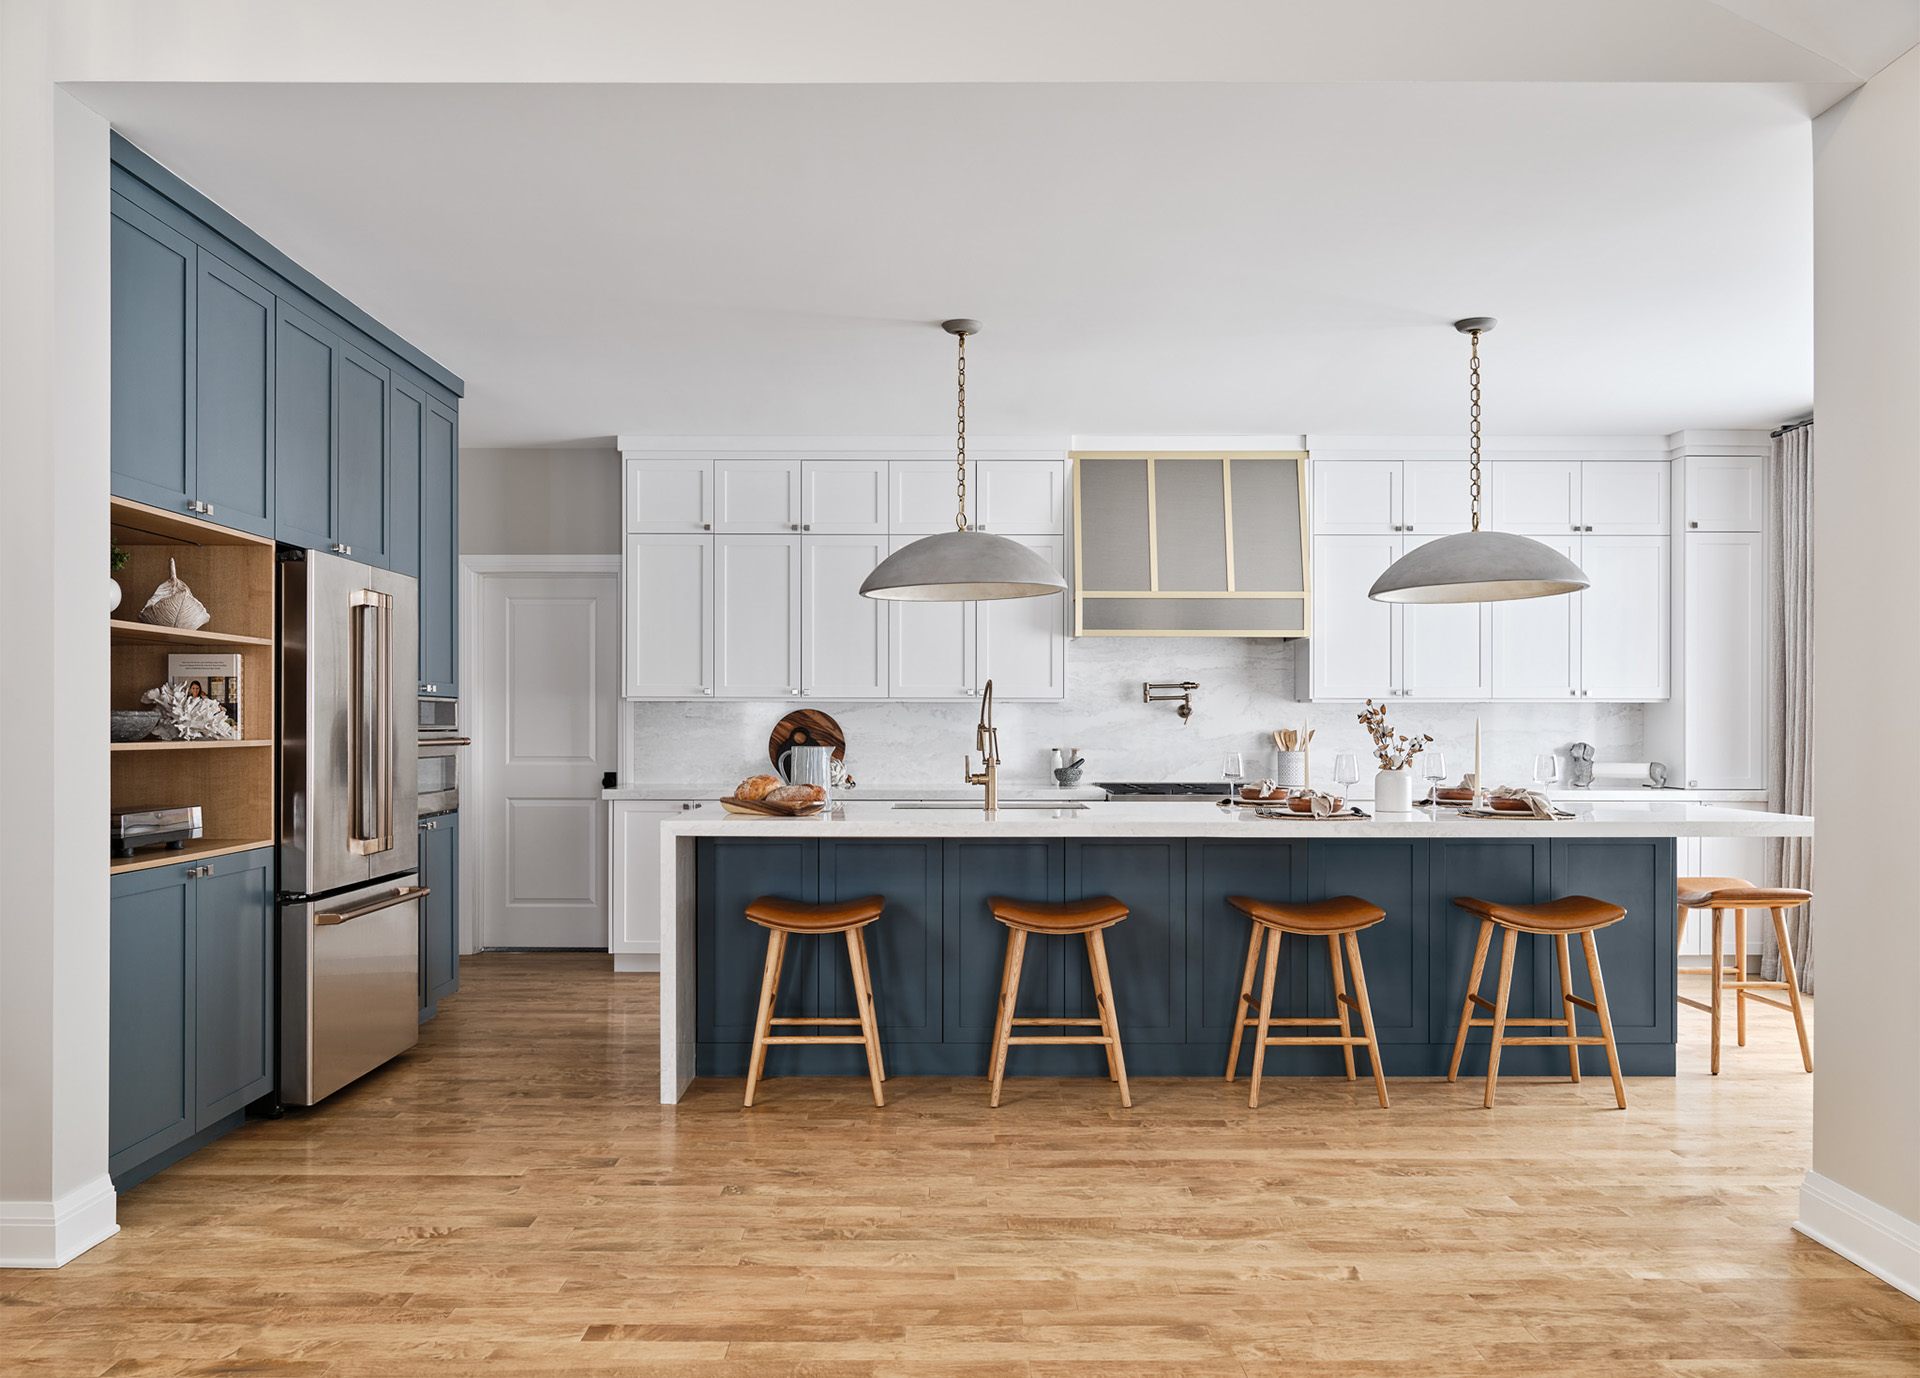 A kitchen with blue cabinets and stools